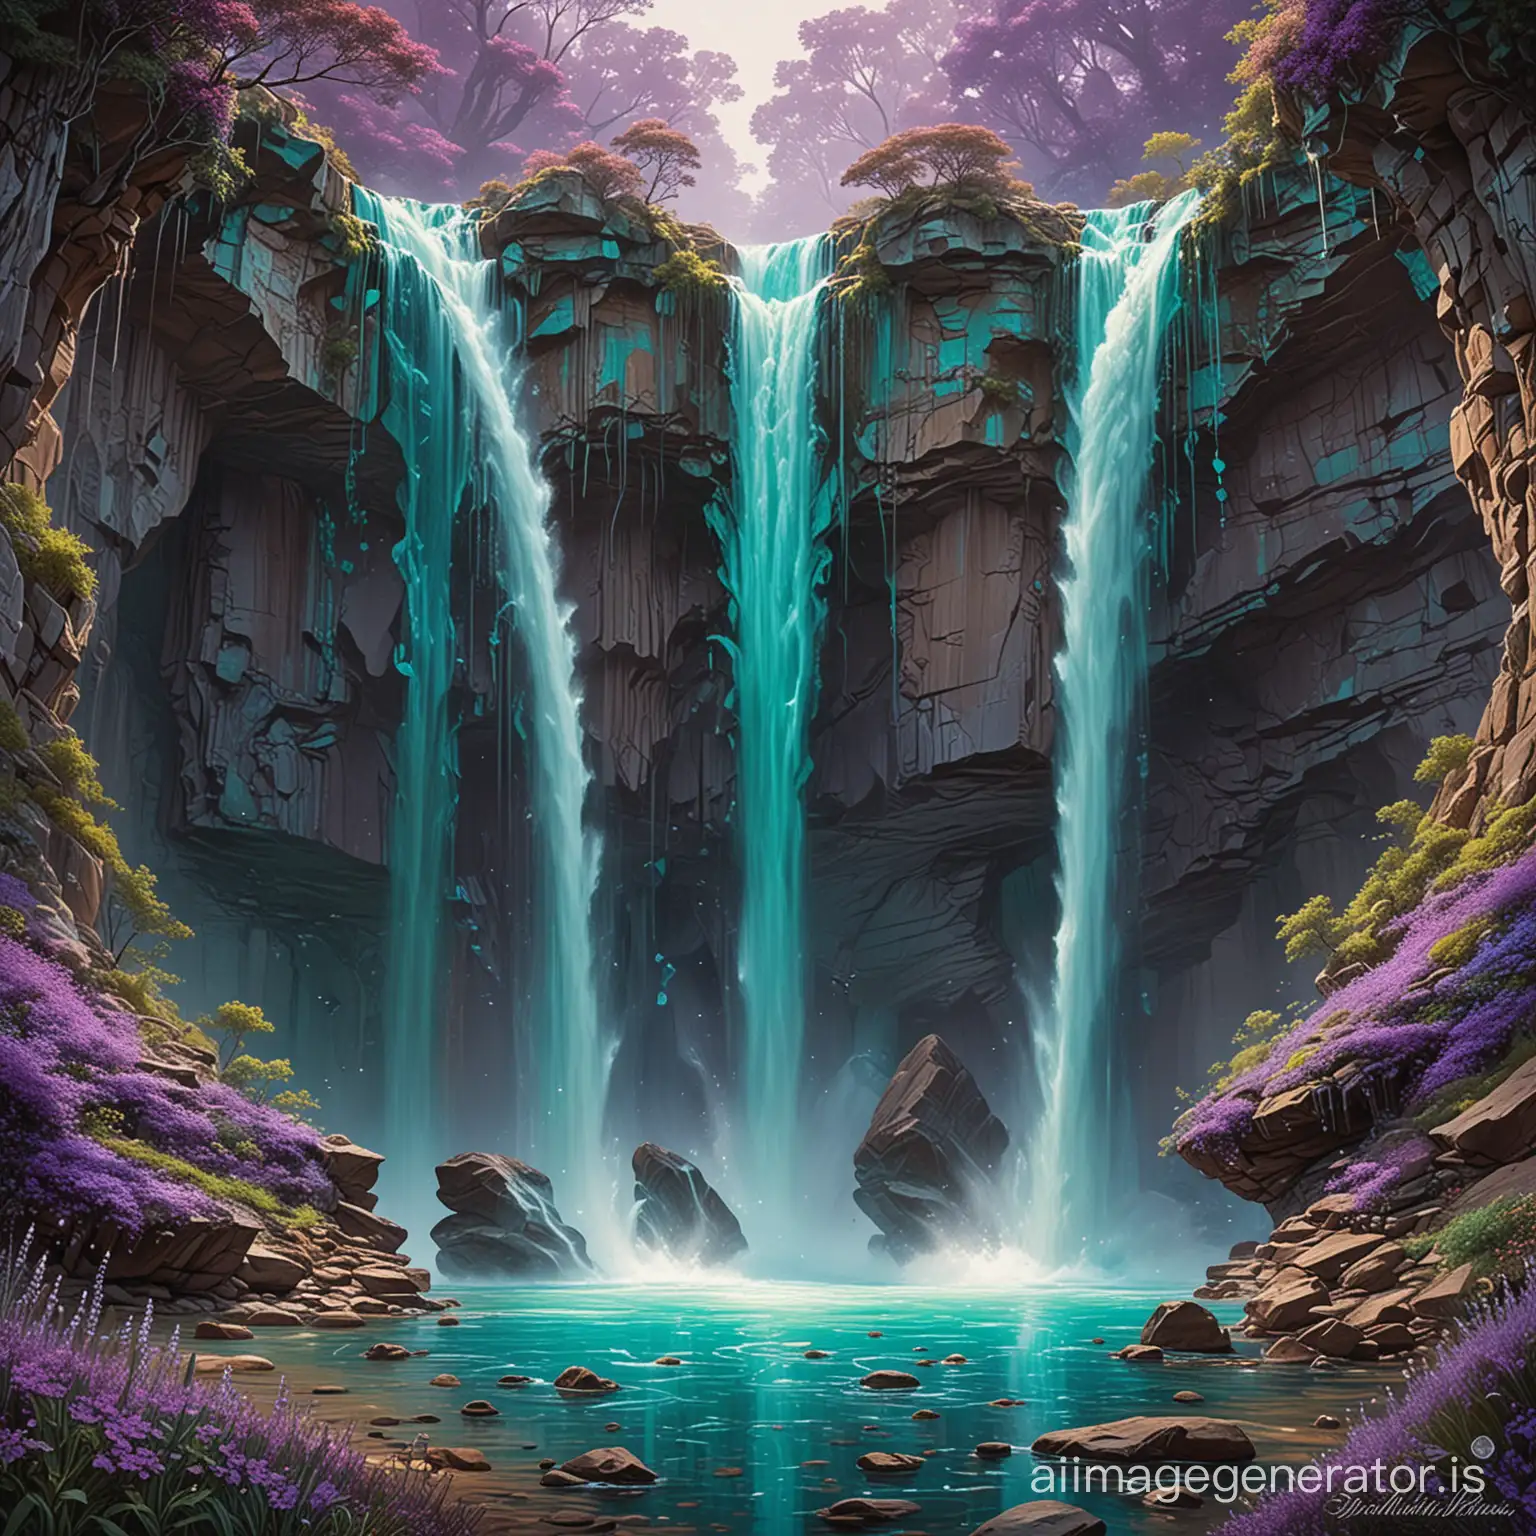 Three mesmerizing upside-down waterfalls cascade gracefully in a surreal alien realm. The water flows upward, defying gravity in a stunning display of otherworldly beauty. This detailed painting captures the vivid hues of emerald and turquoise water against a backdrop of shimmering violet rocks. Each waterfall is intricately depicted, with intricate patterns and textures that draw the viewer in. The overall effect is a masterpiece that seamlessly combines fantasy and reality in a way that is truly awe-inspiring.